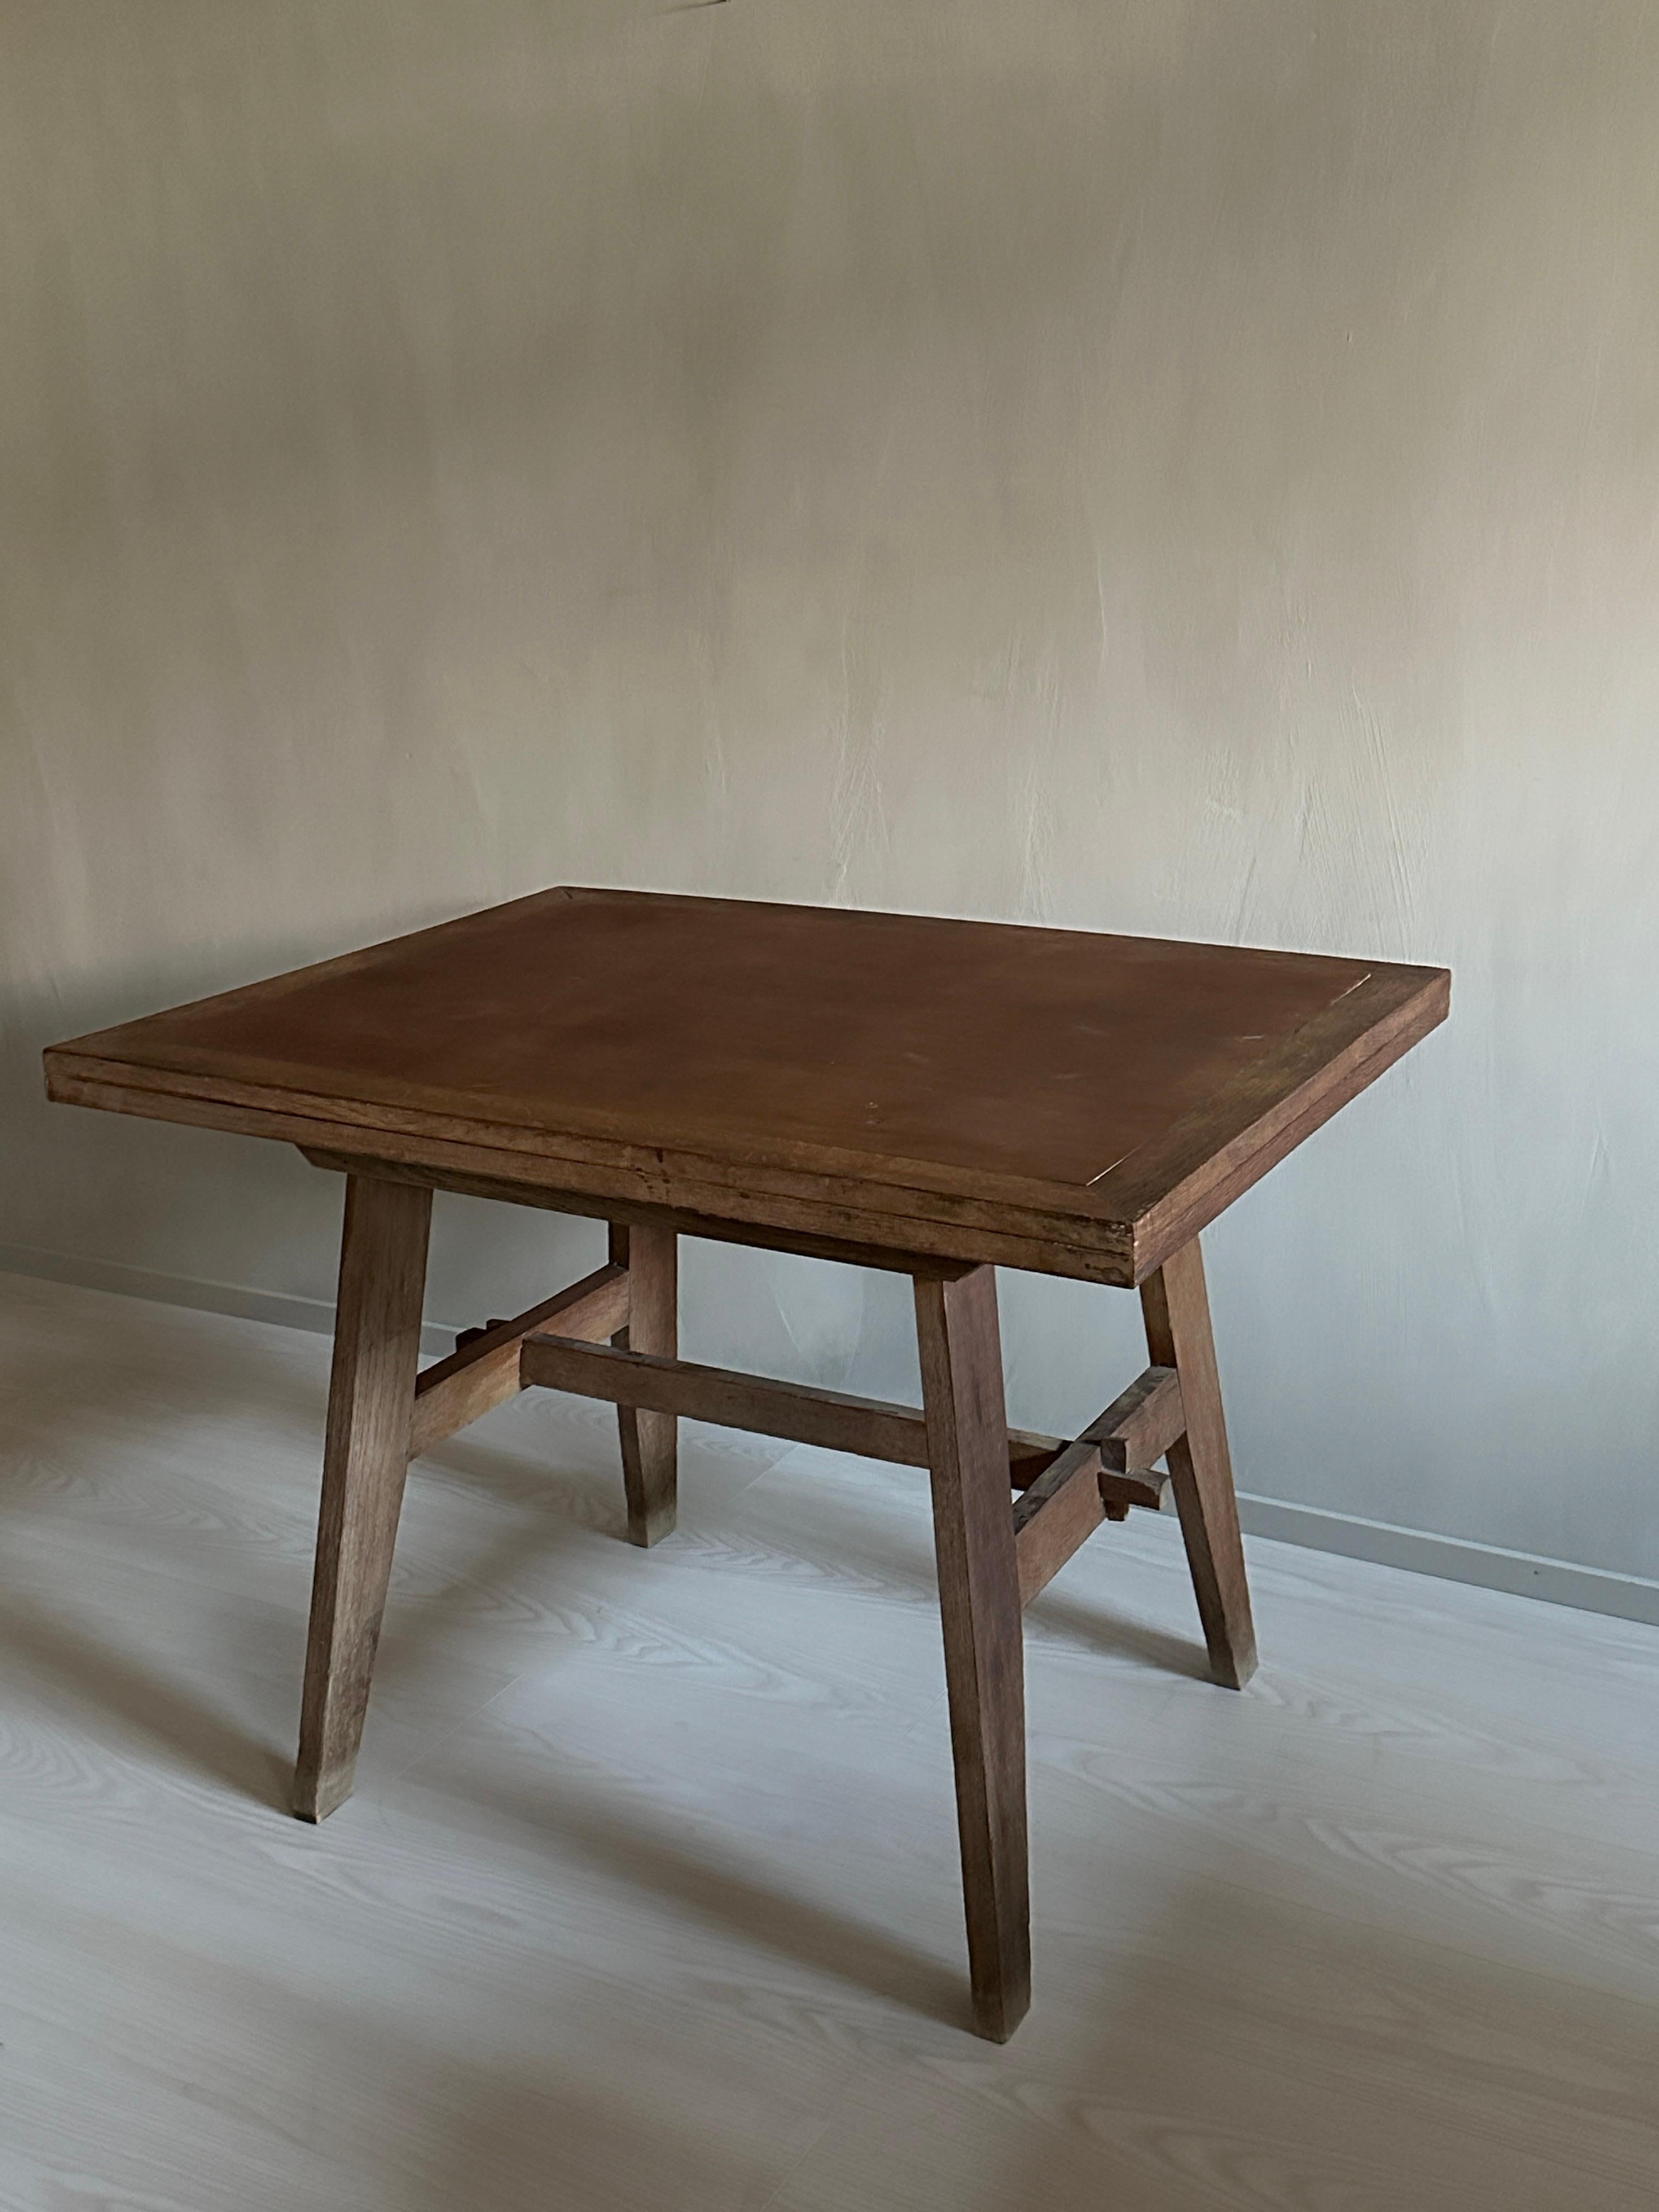 A beautiful kitchen table in oak designed by René Gabriel, France 1945.

René Gabriel put himself at the service of French Reconstruction from the 1940s. He designed furniture intended to be produced in large series, using local wood species such